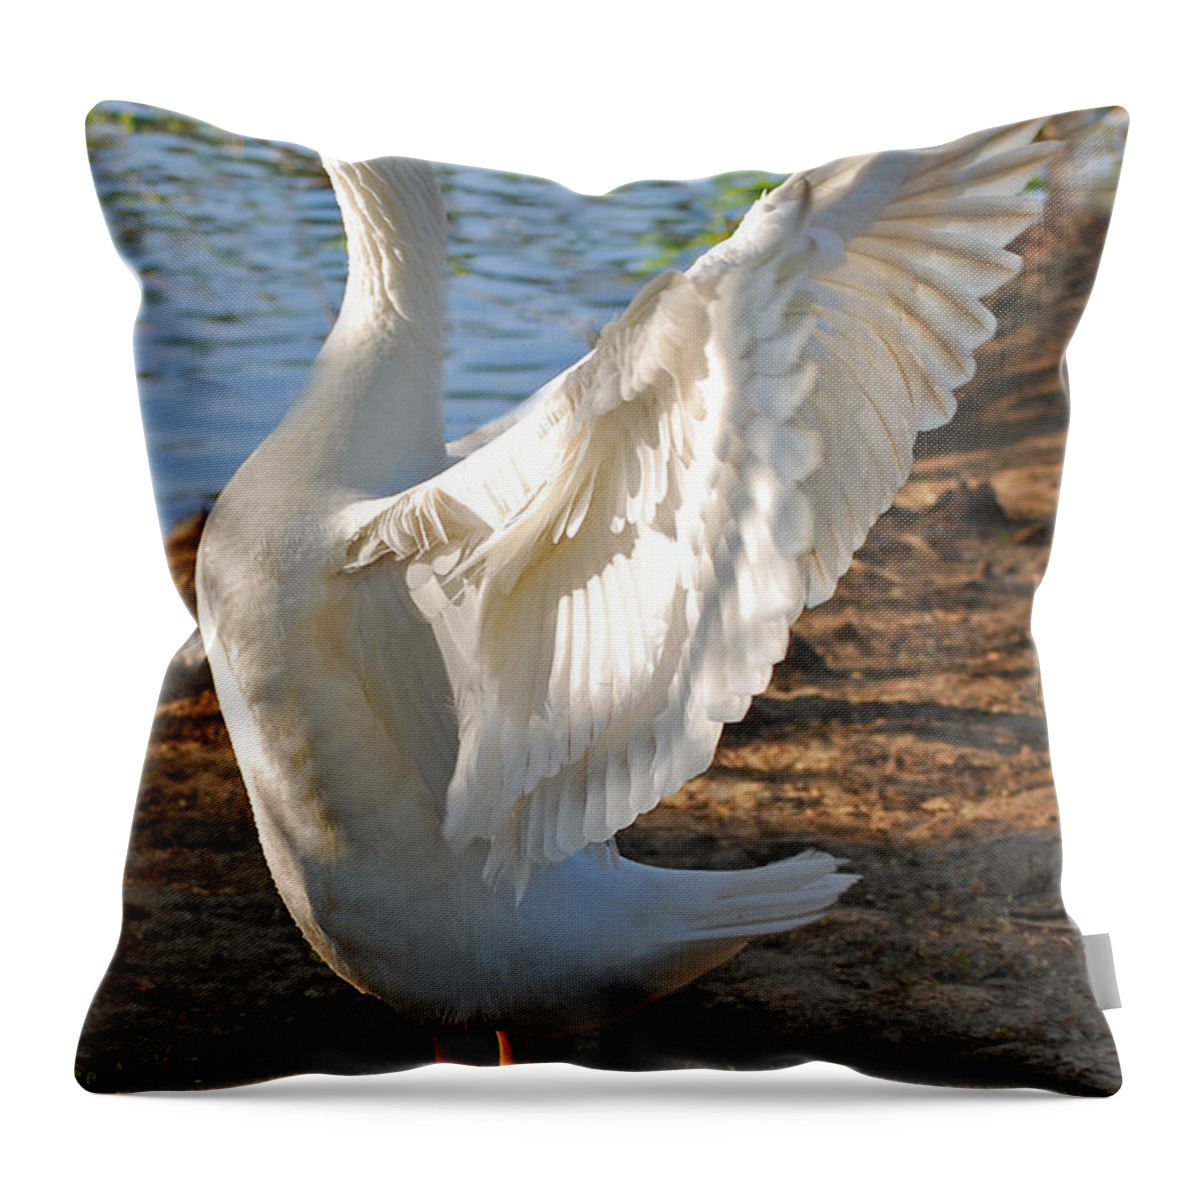 Landscape Throw Pillow featuring the photograph Spread Your Wings by Lisa Phillips